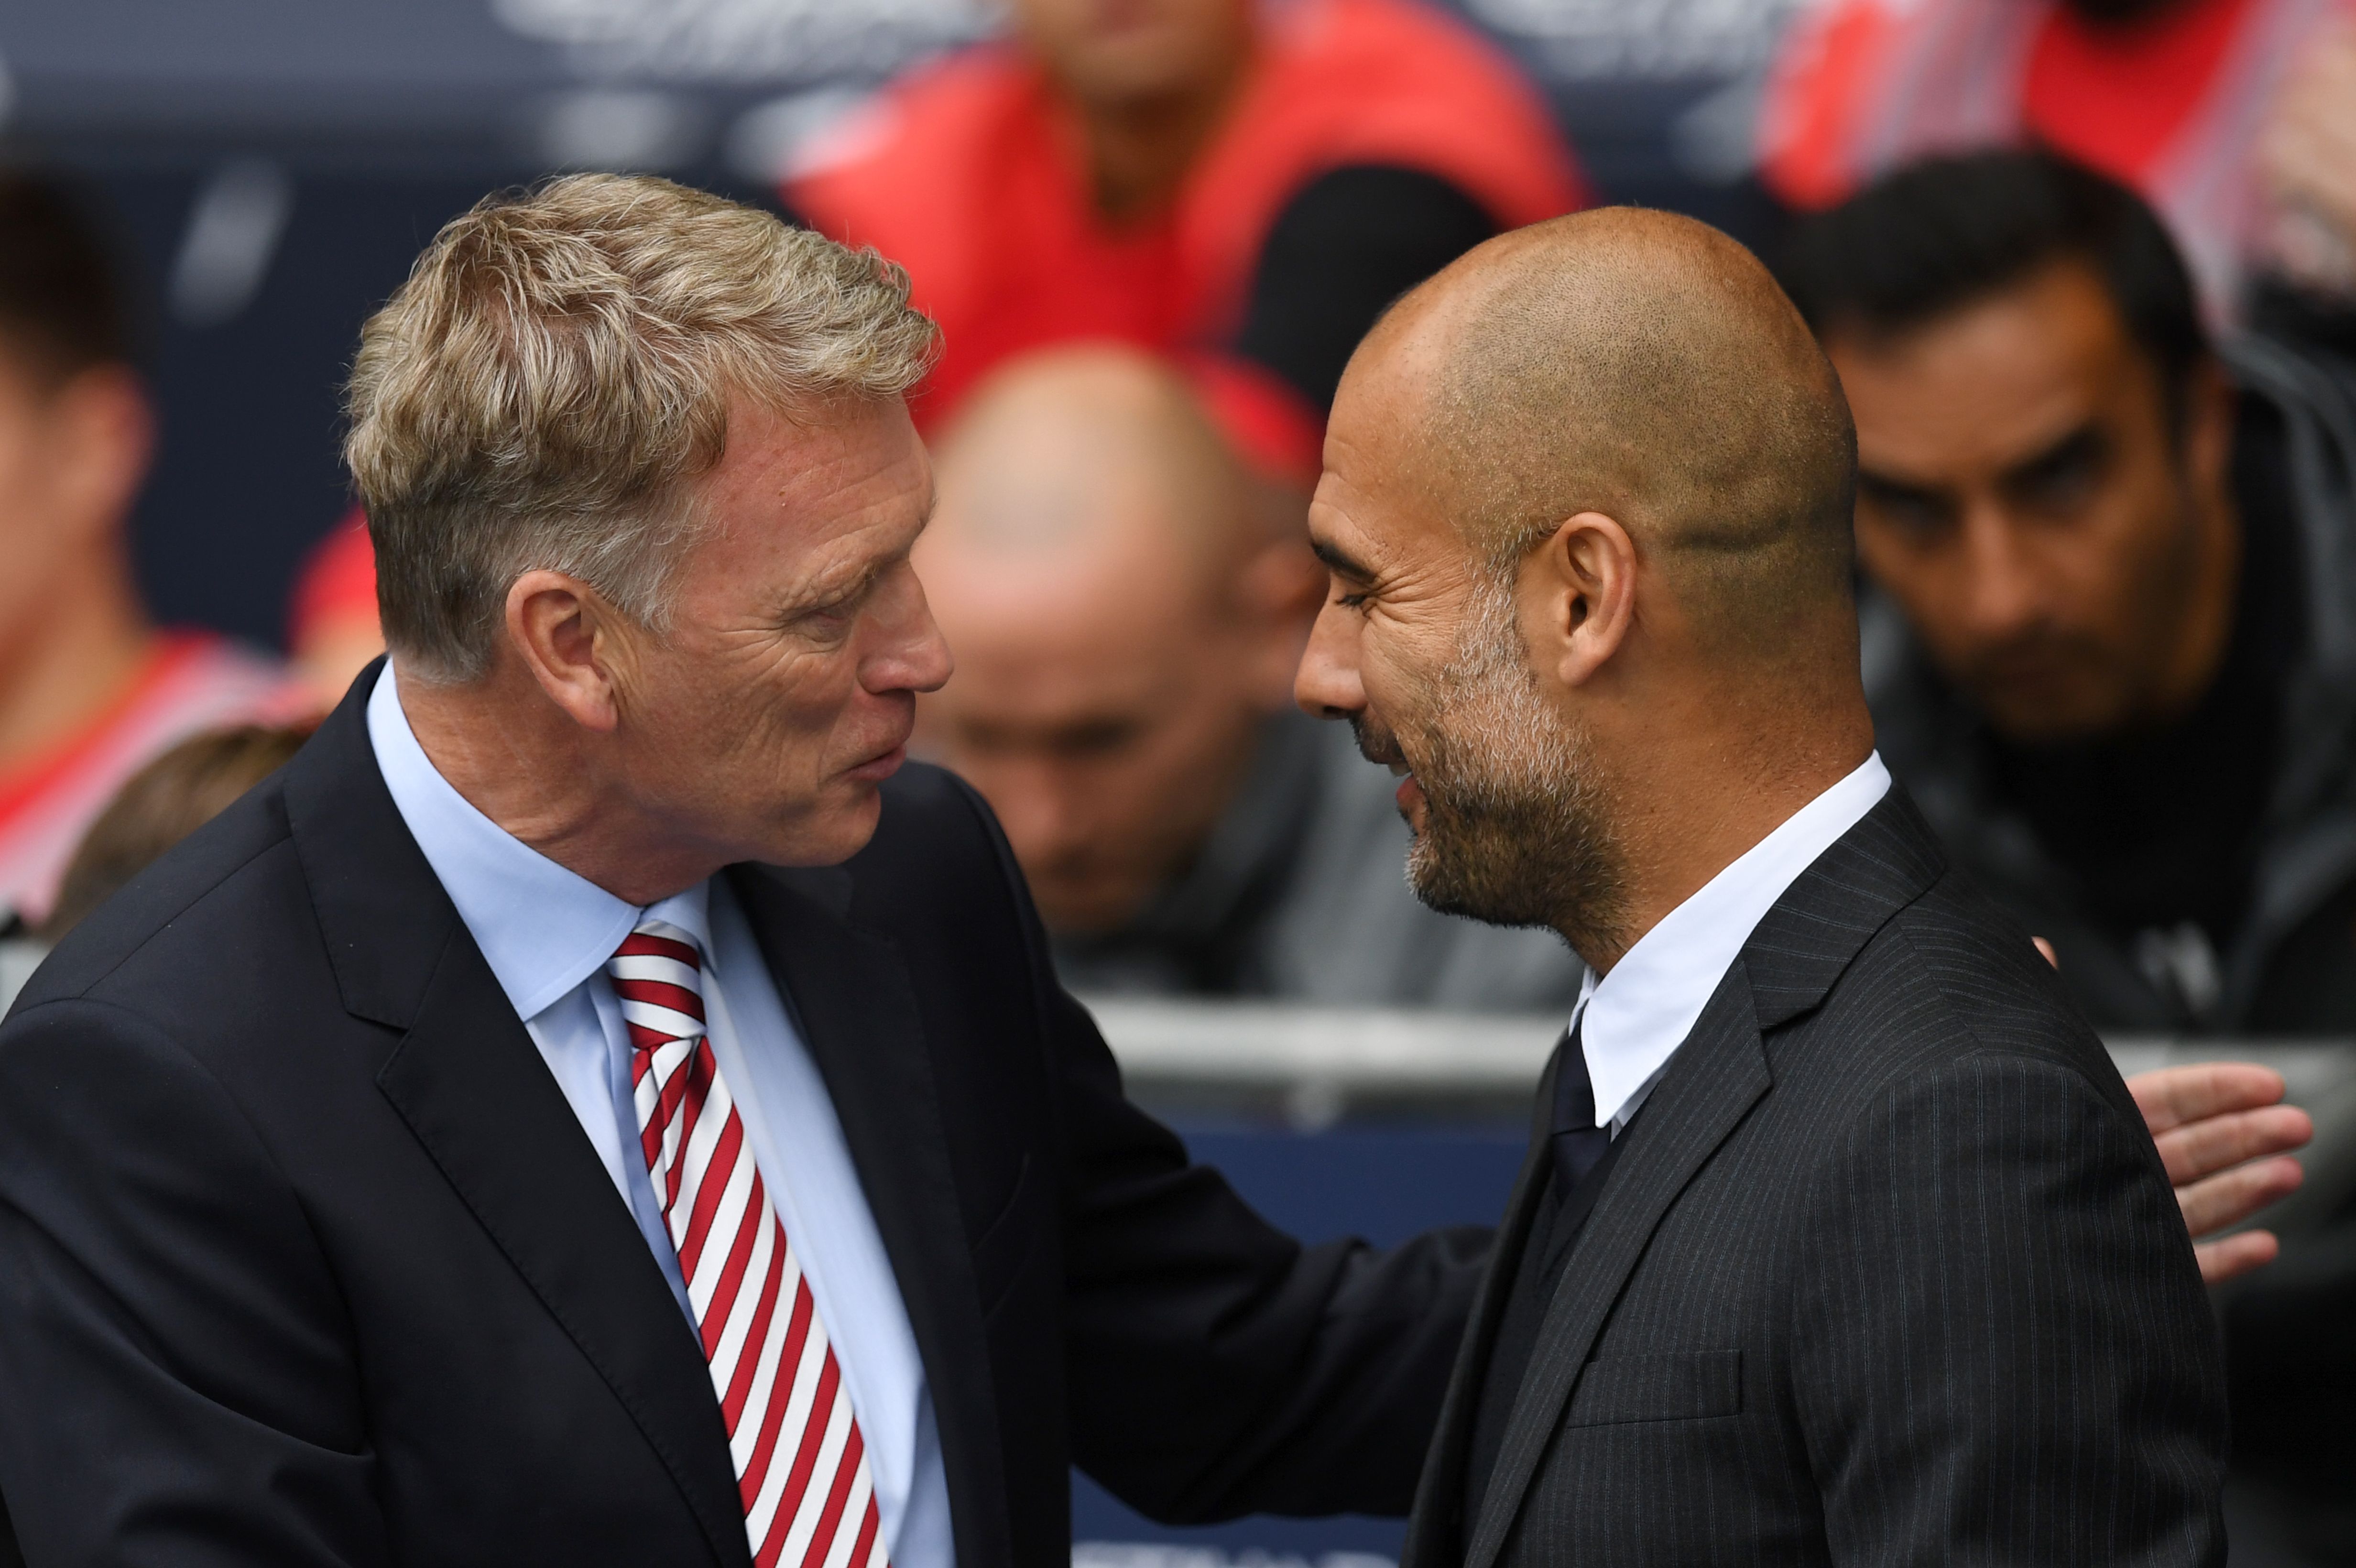 Manchester City's Spanish manager Pep Guardiola (R) greets Sunderland's Scottish manager David Moyes (L) for the English Premier League football match between Manchester City and Sunderland at the Etihad Stadium in Manchester, north west England, on August 13, 2016. / AFP / PAUL ELLIS / RESTRICTED TO EDITORIAL USE. No use with unauthorized audio, video, data, fixture lists, club/league logos or 'live' services. Online in-match use limited to 75 images, no video emulation. No use in betting, games or single club/league/player publications.  /         (Photo credit should read PAUL ELLIS/AFP via Getty Images)